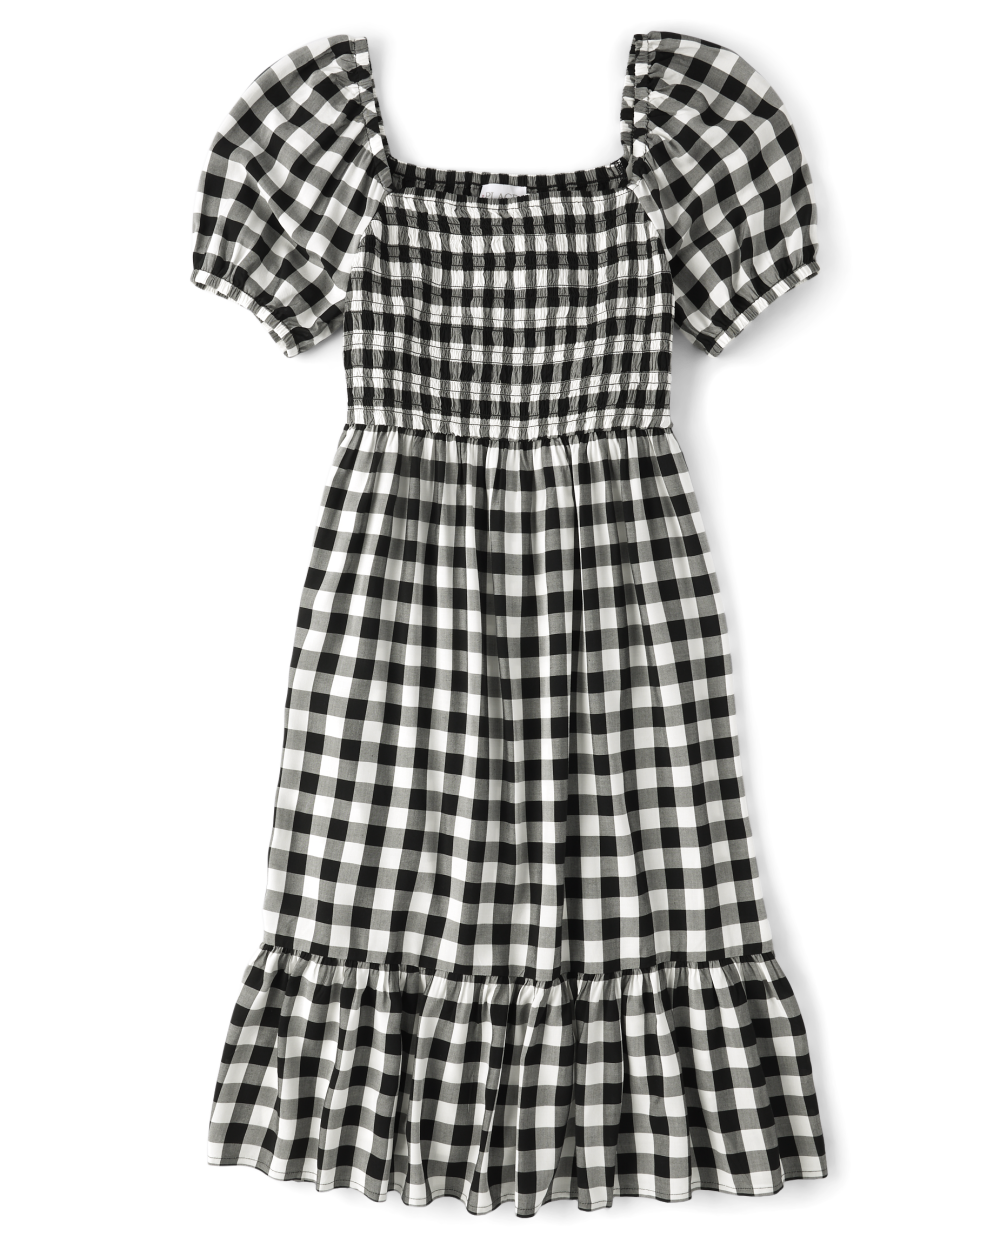 Checkered Gingham Print Puff Sleeves Short Sleeves Sleeves Rayon Above the Knee Smocked Square Neck Dress With Ruffles